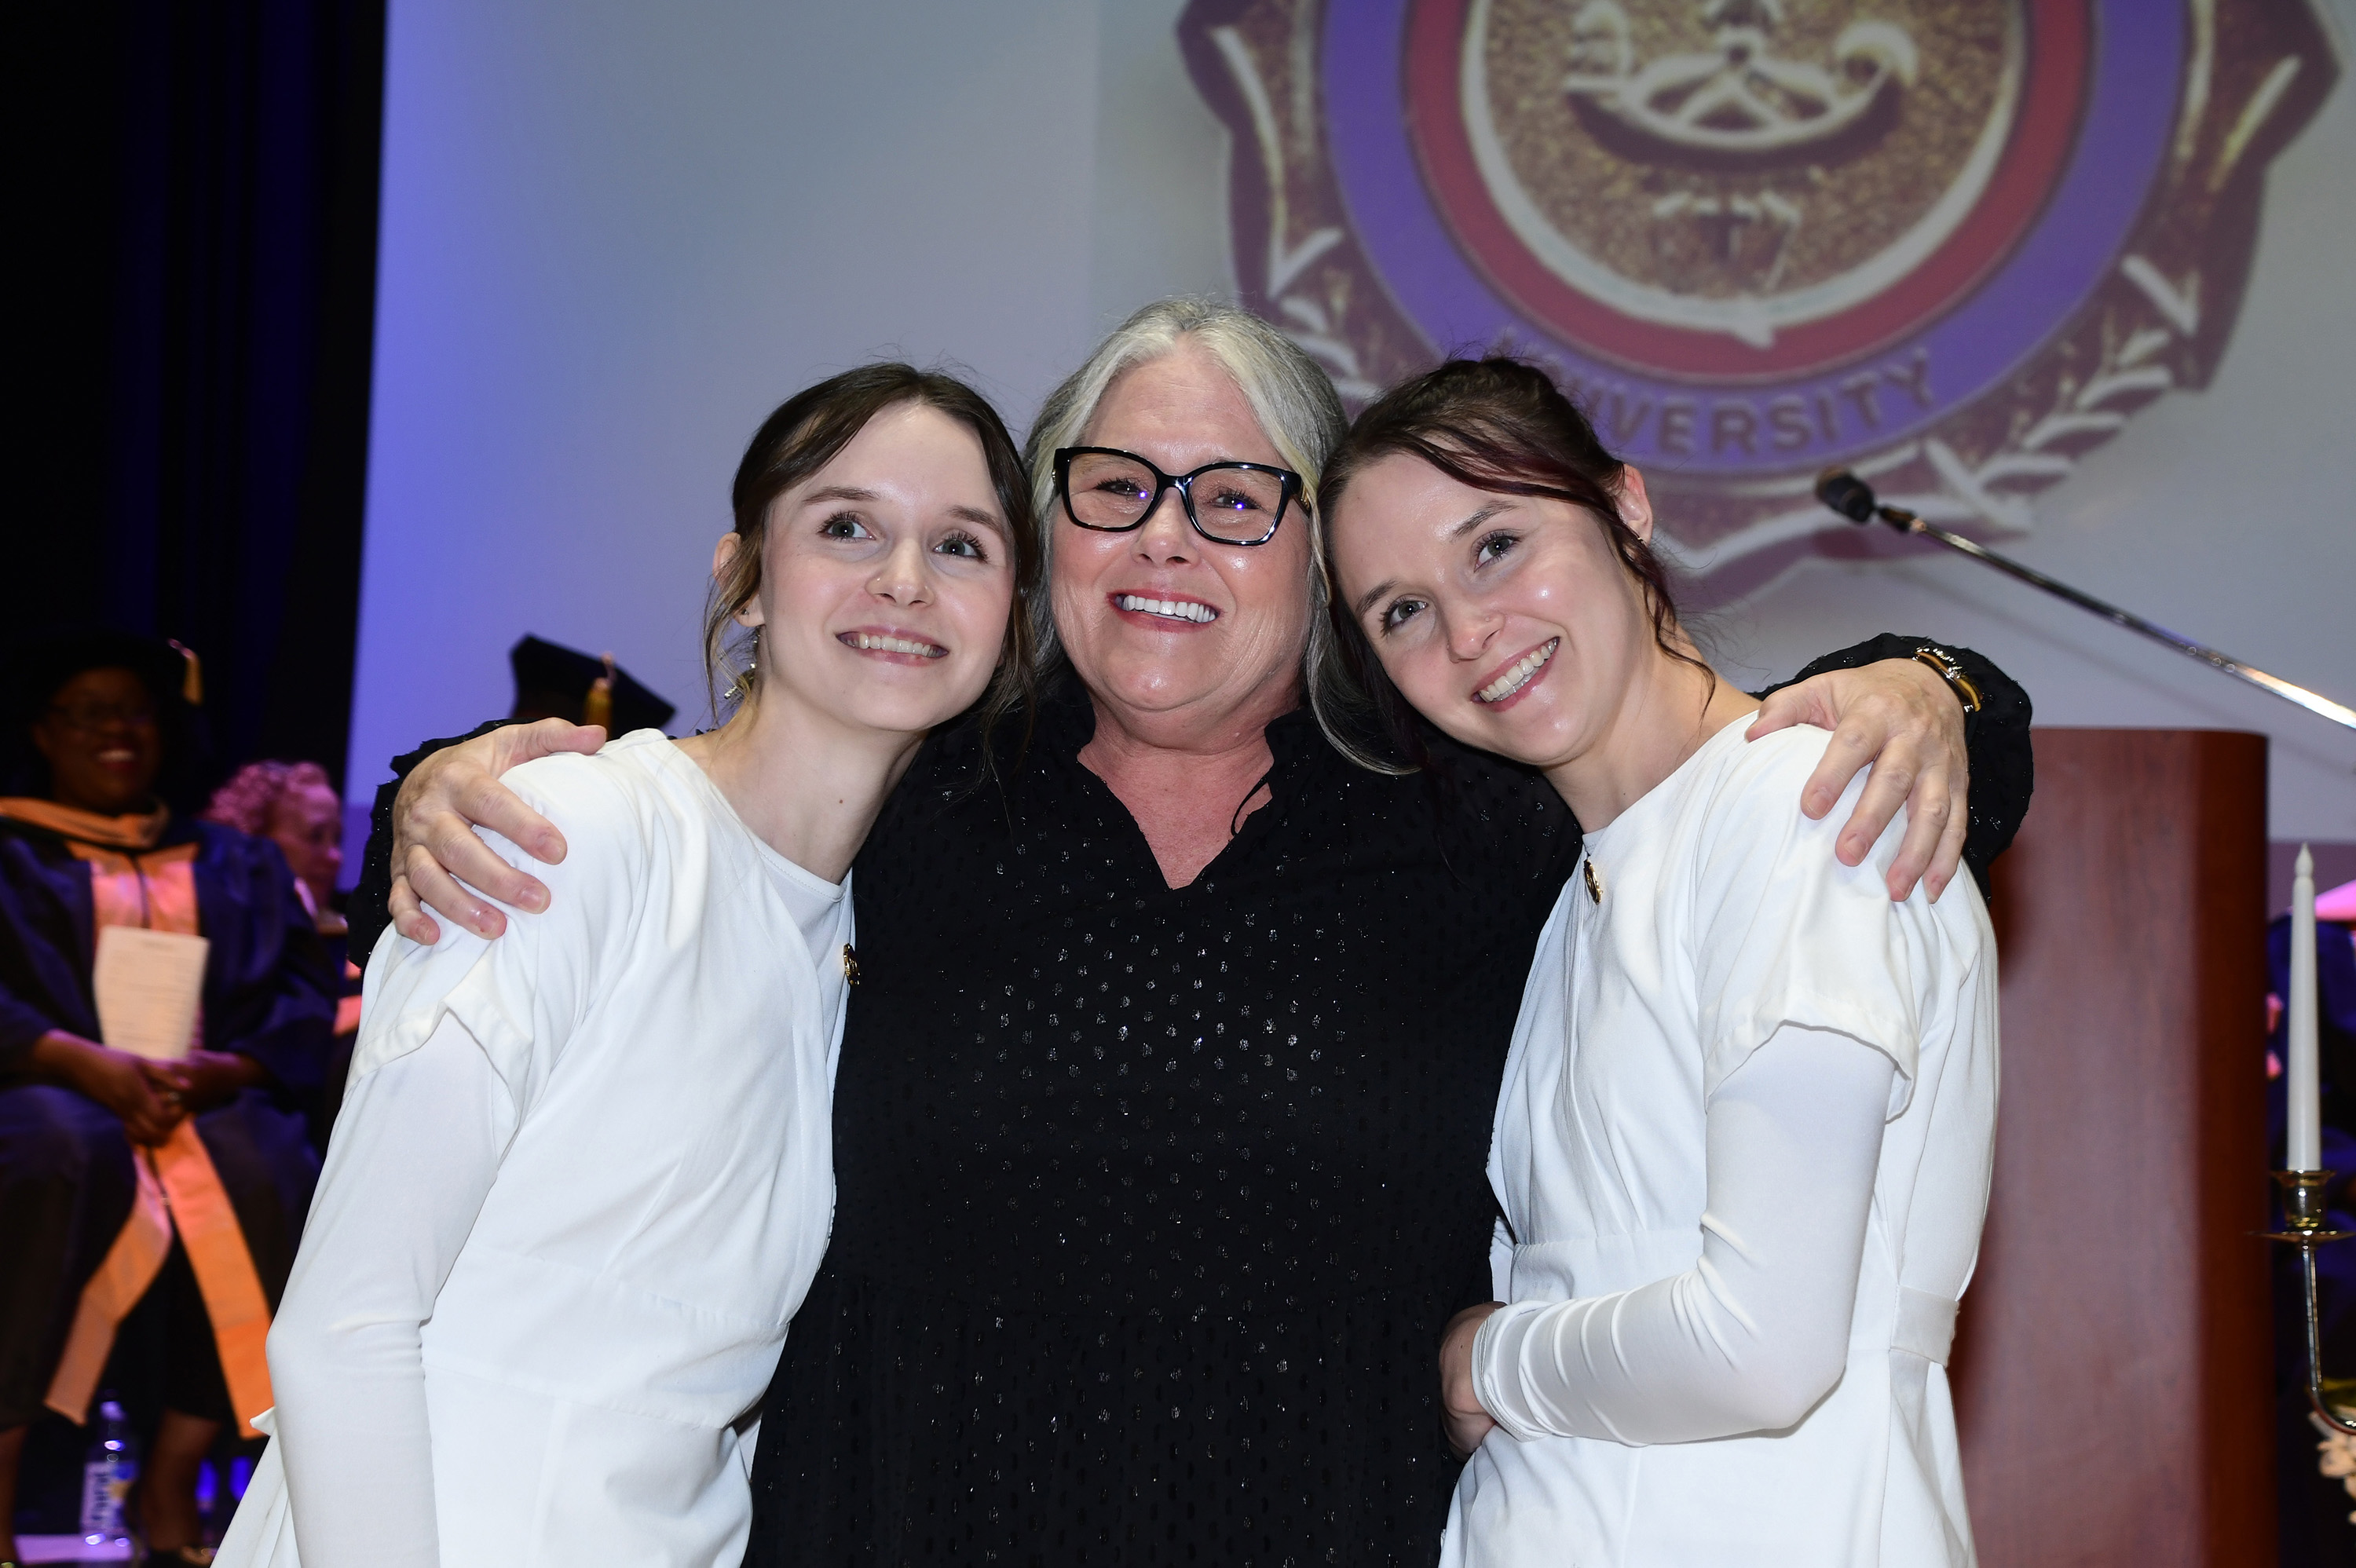 Shari Keller poses with her twin daughters Megan and Misty after giving them their nursing pins.